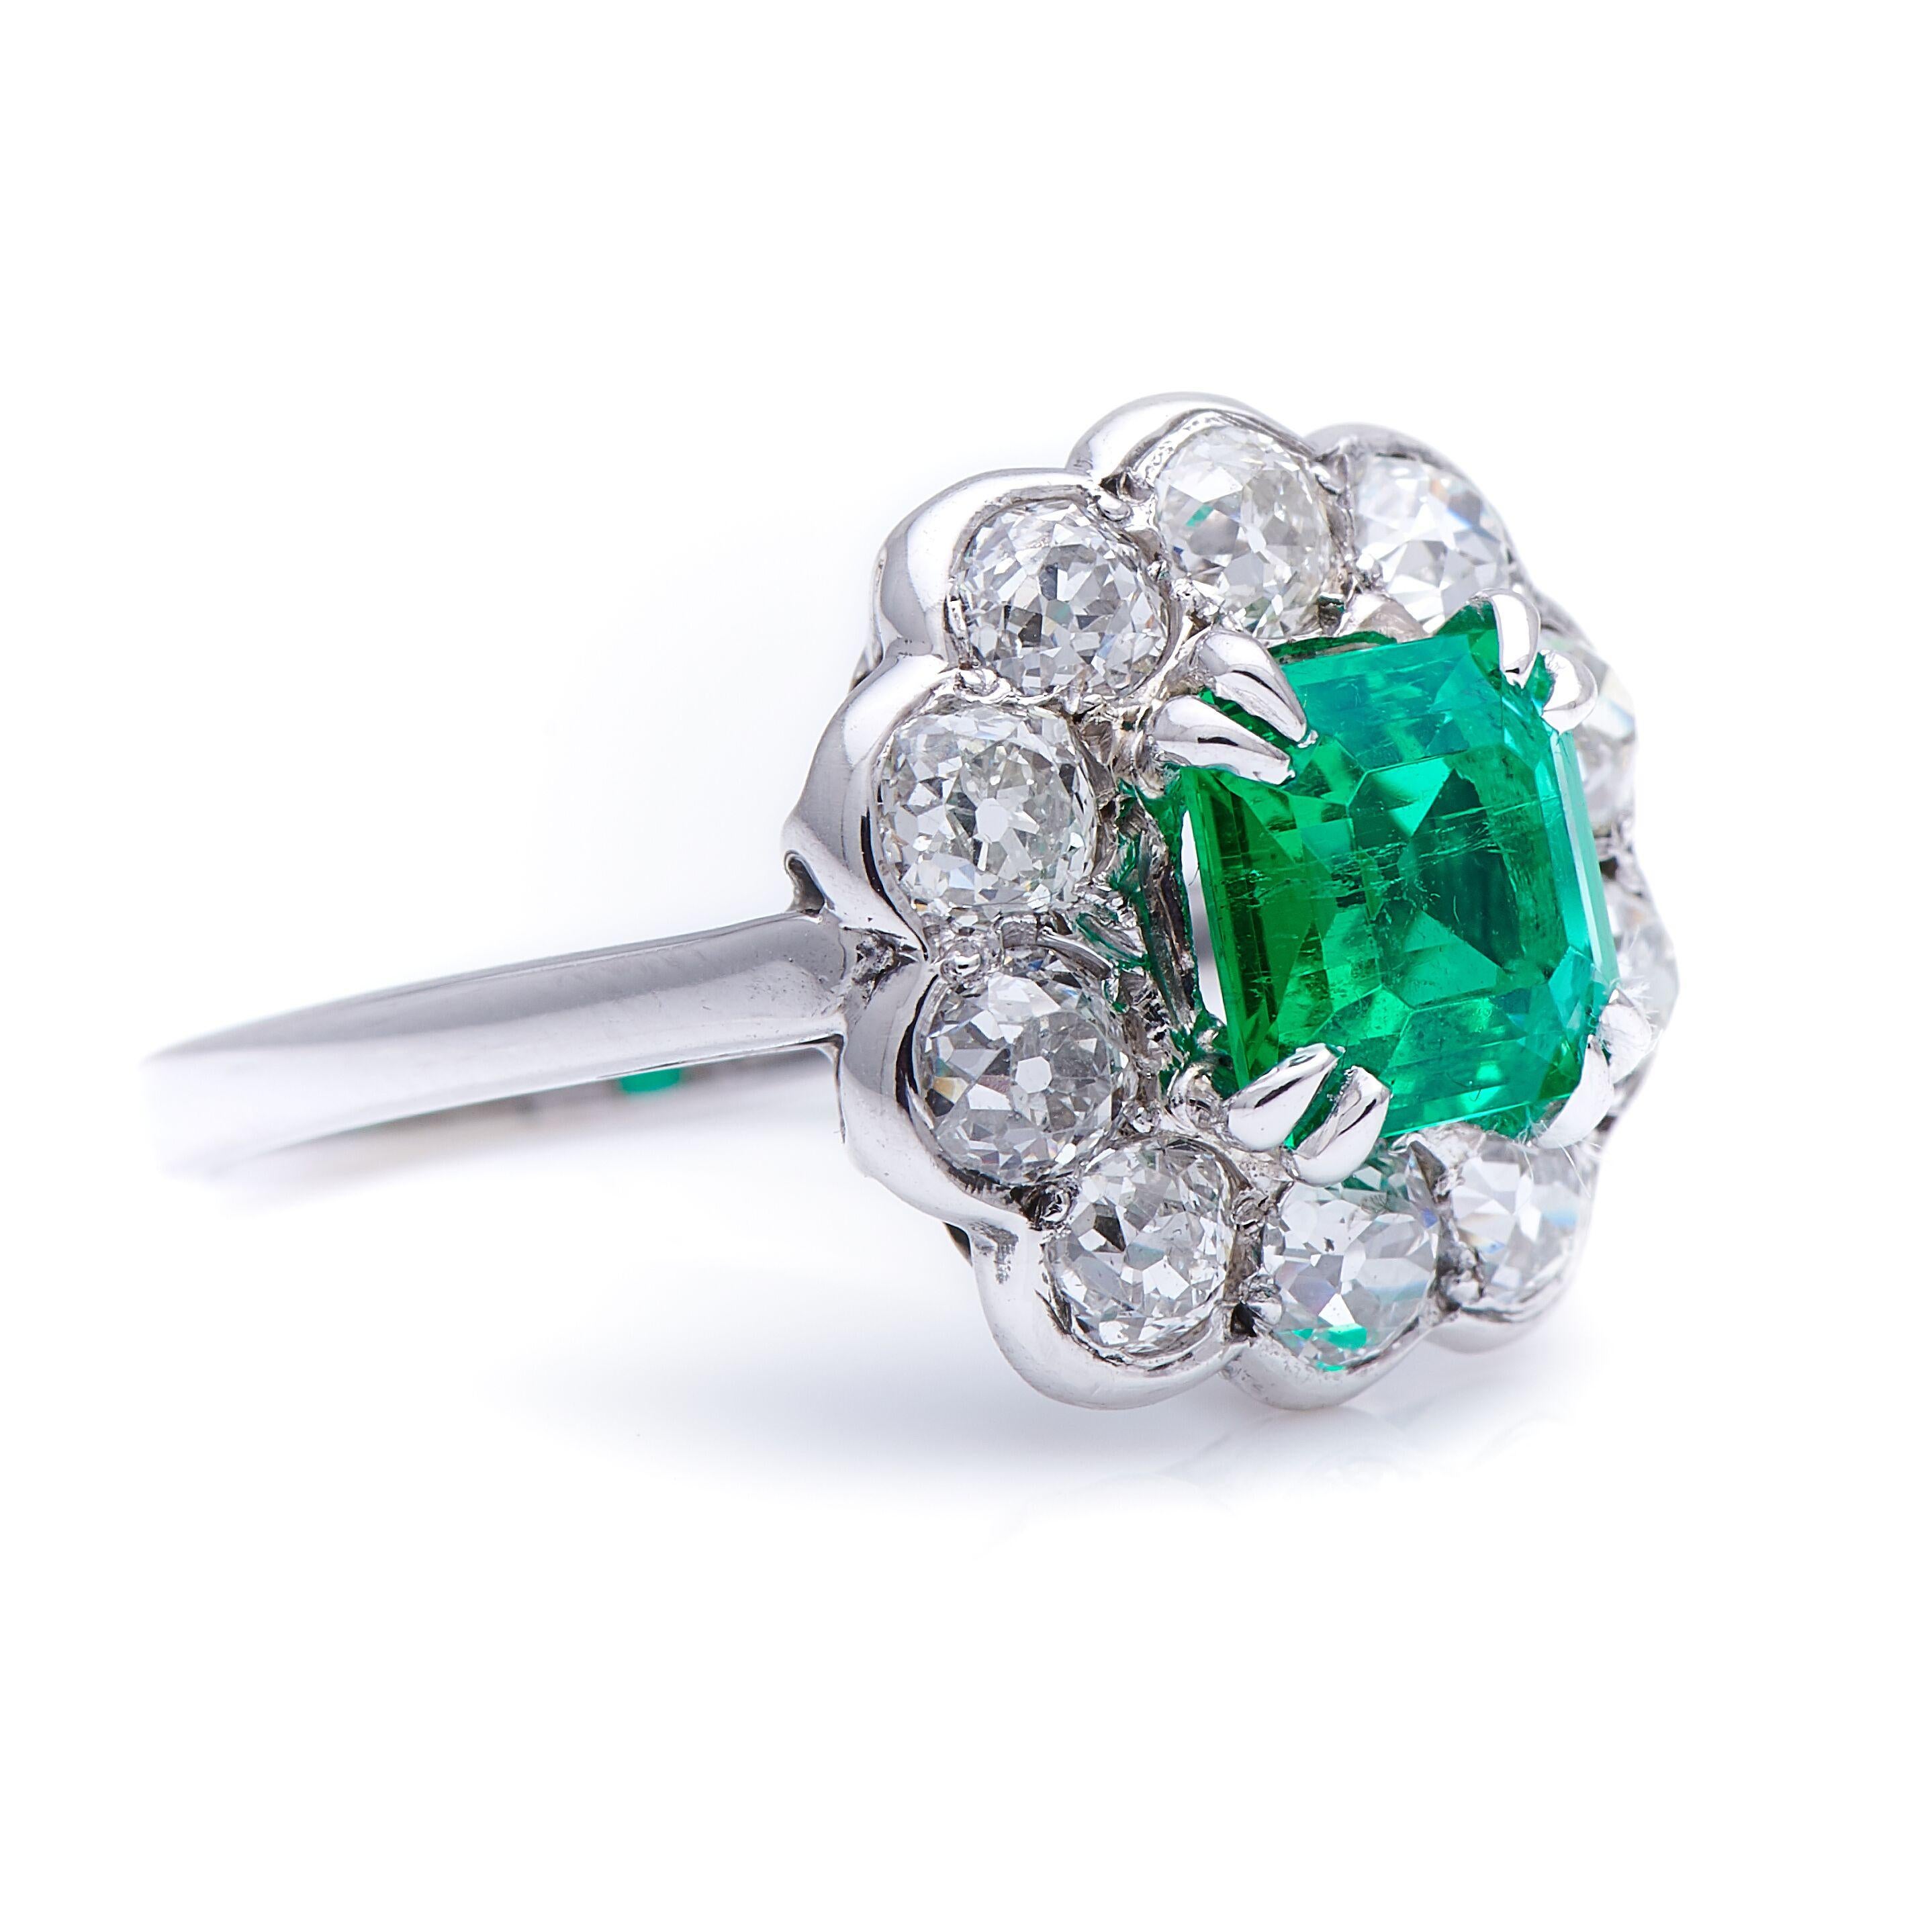 Emerald and diamond ring, circa 1940. This classic floral cluster centres on an excellent Colombian emerald weighing approximately 1.1 carats. Its vibrant, fresh green tone is bettered only by a superb and rare level of clarity for an emerald, with